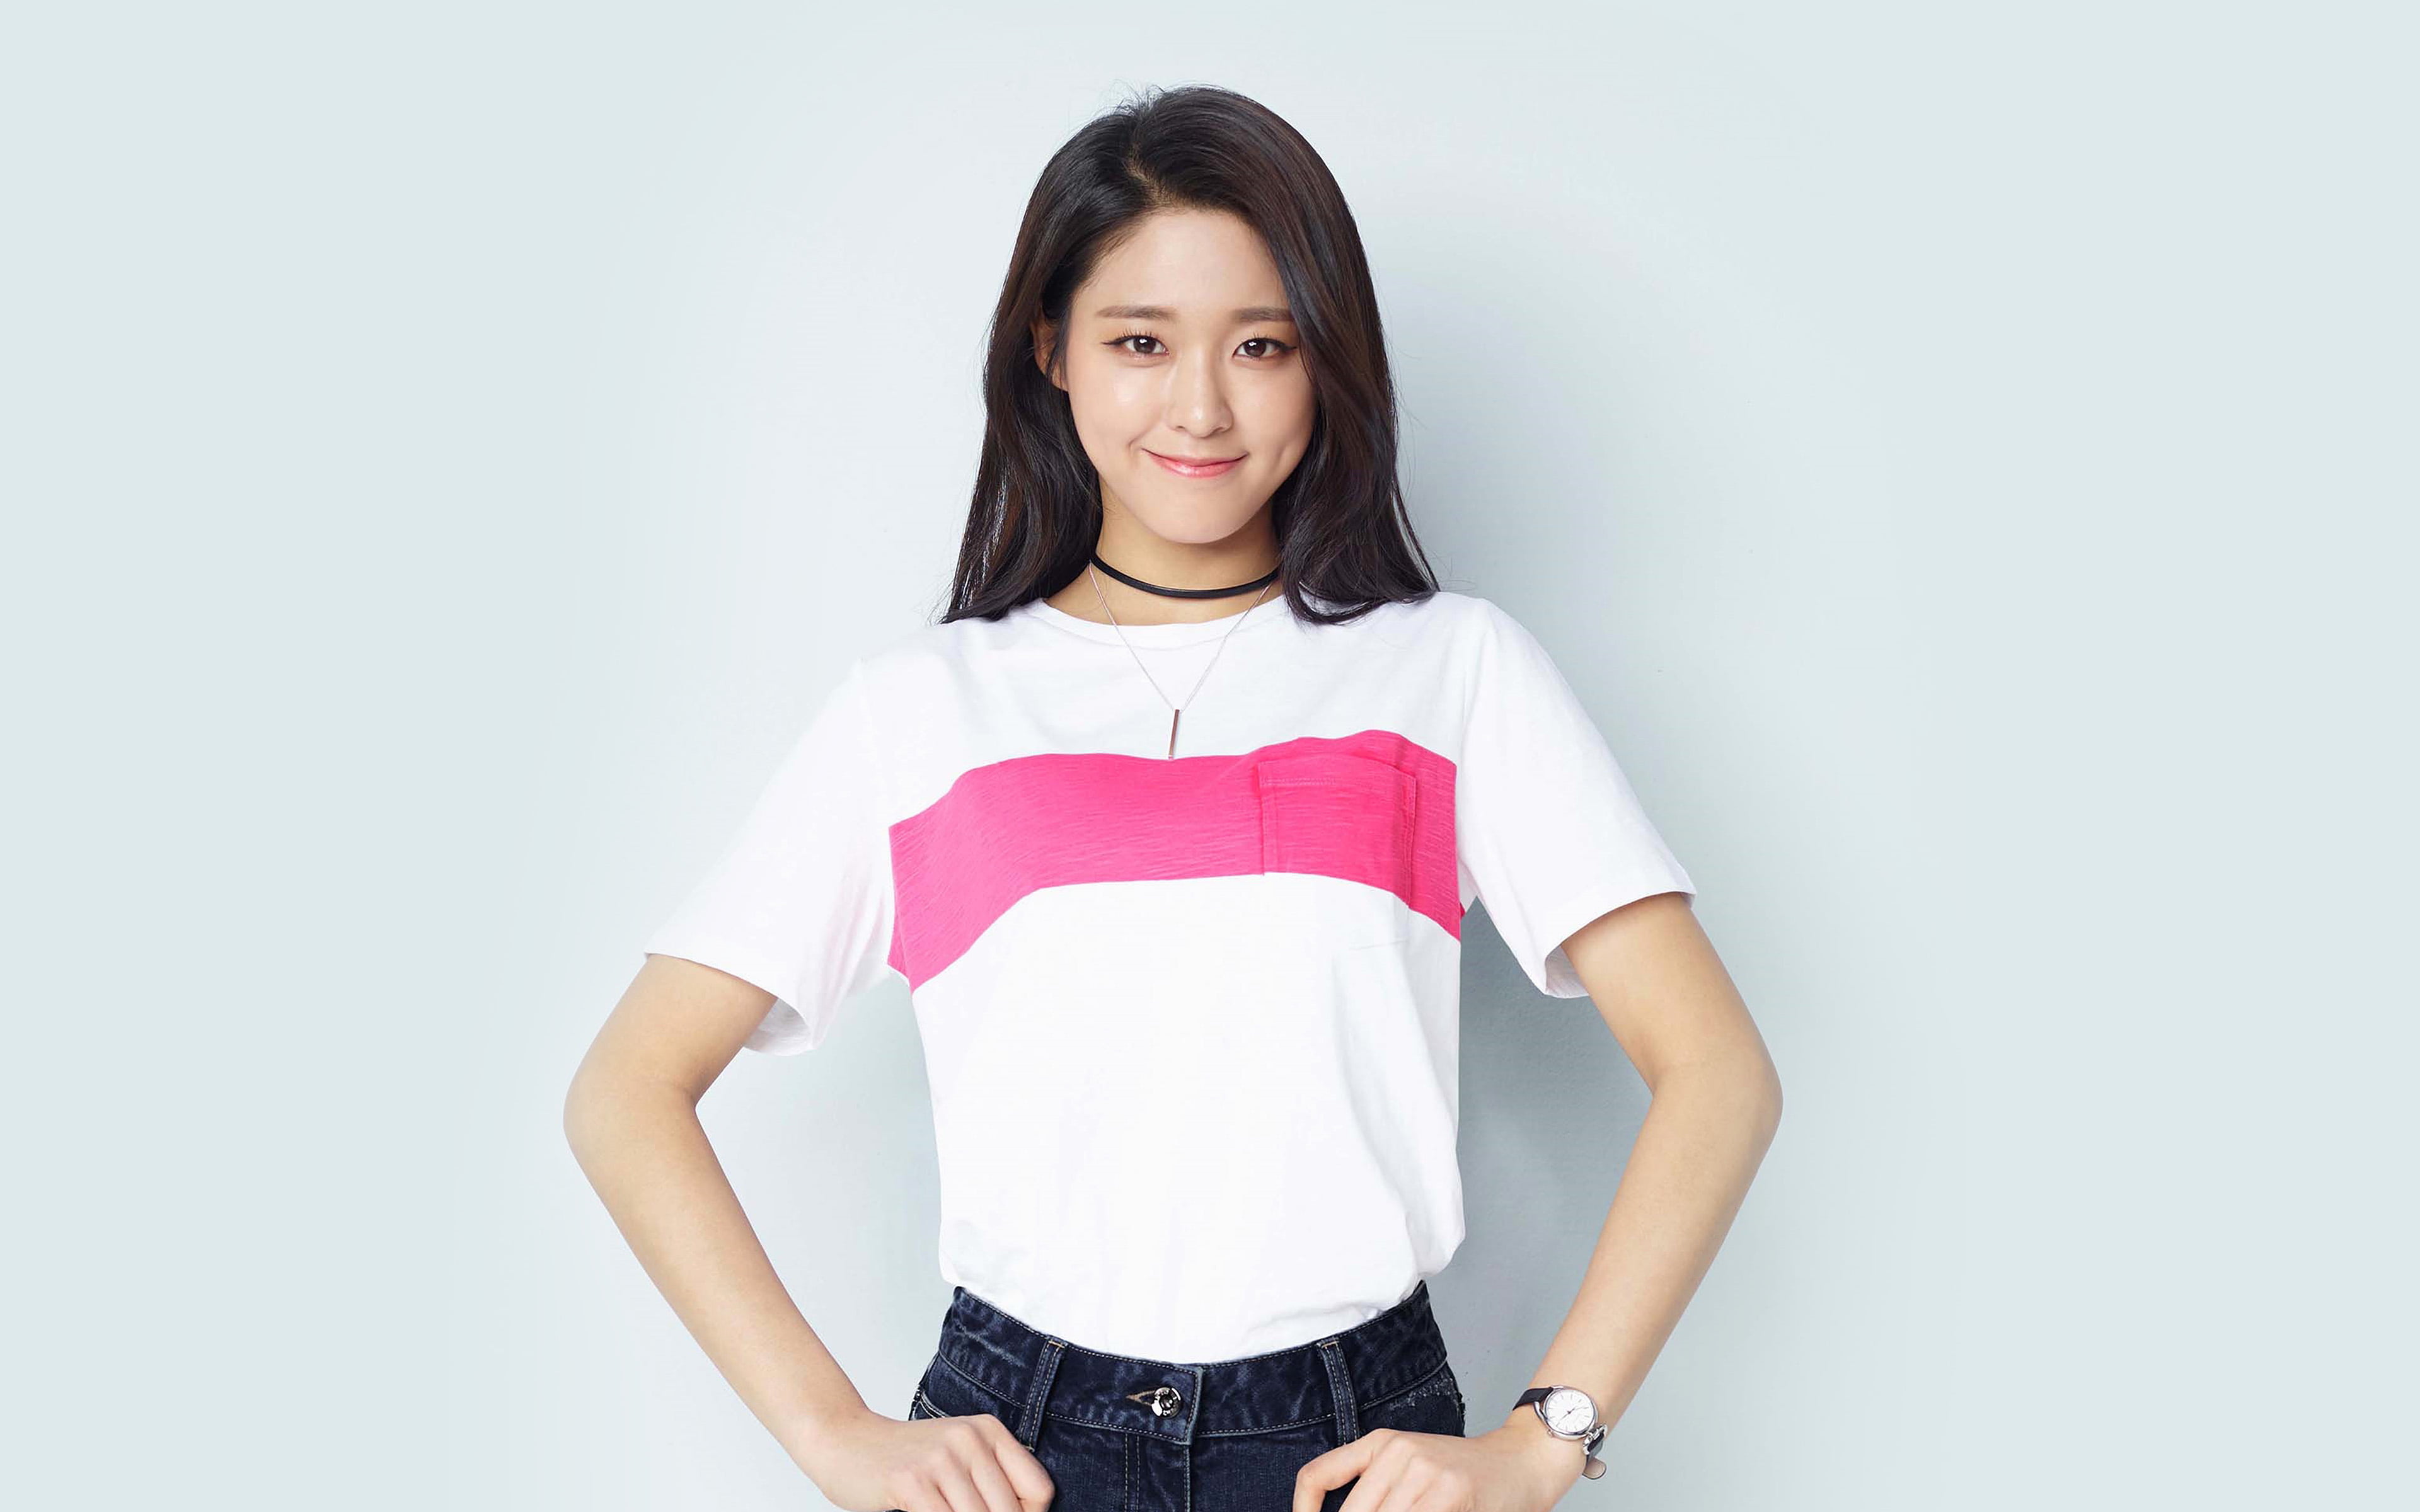 seolhyun, kpop, girl, cute, looking at camera, portrait, front view